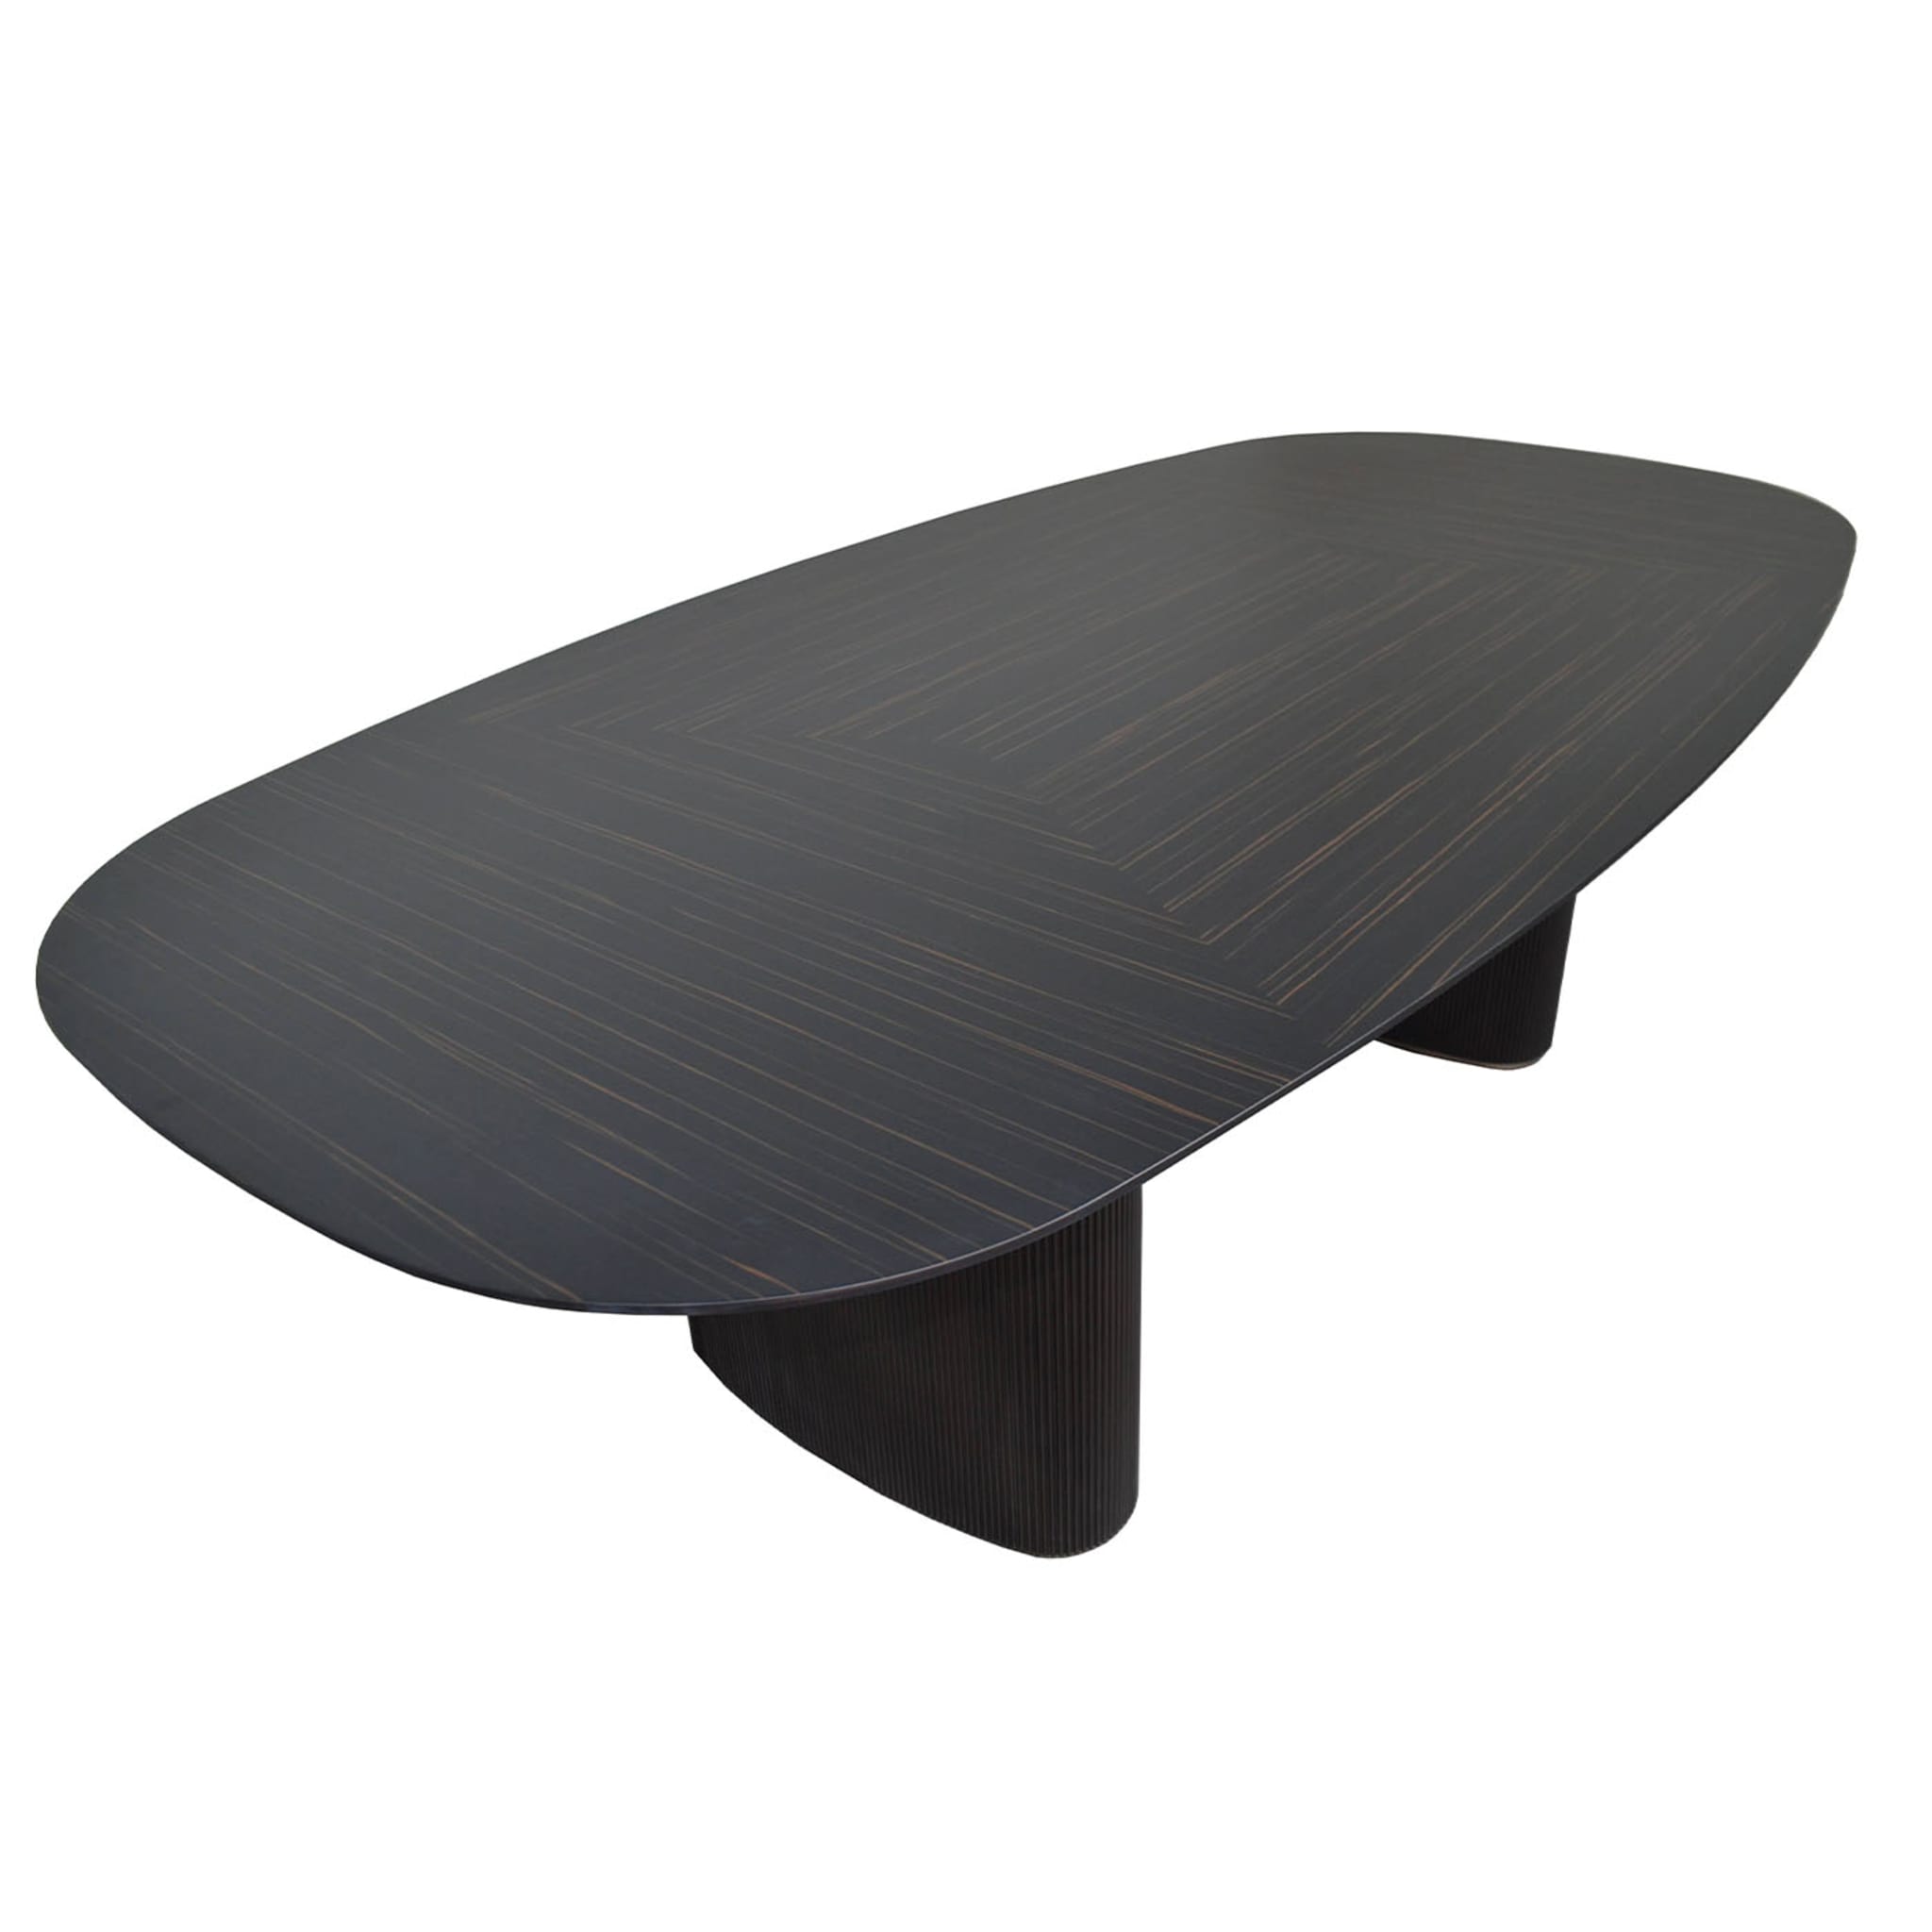 Italian Contemporary Oval Curved Dining Table  - Alternative view 2